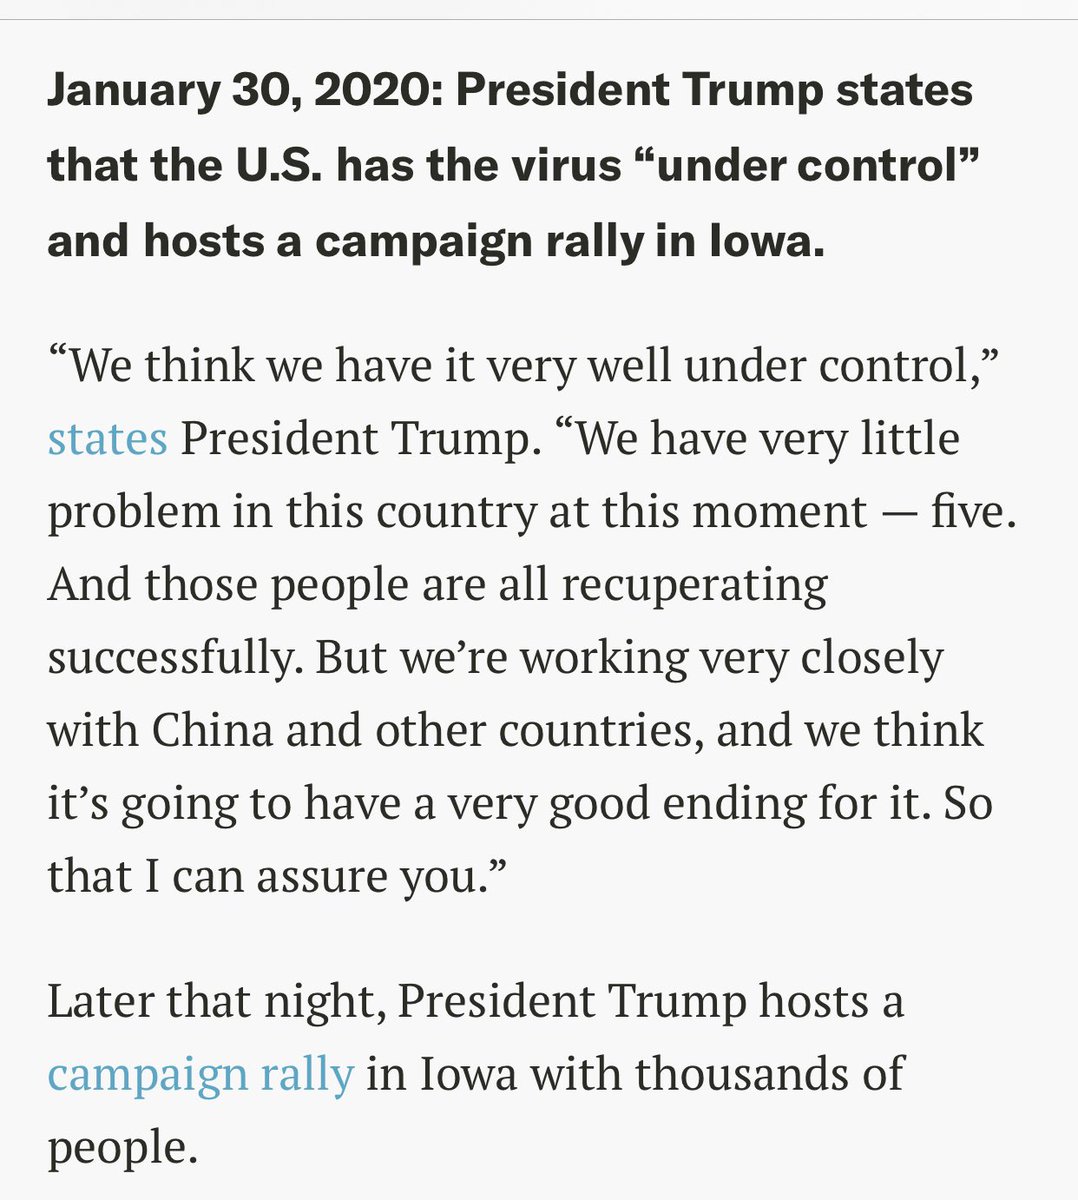 Here’s Trump at a campaign rally in Iowa Jan 30, 2020.